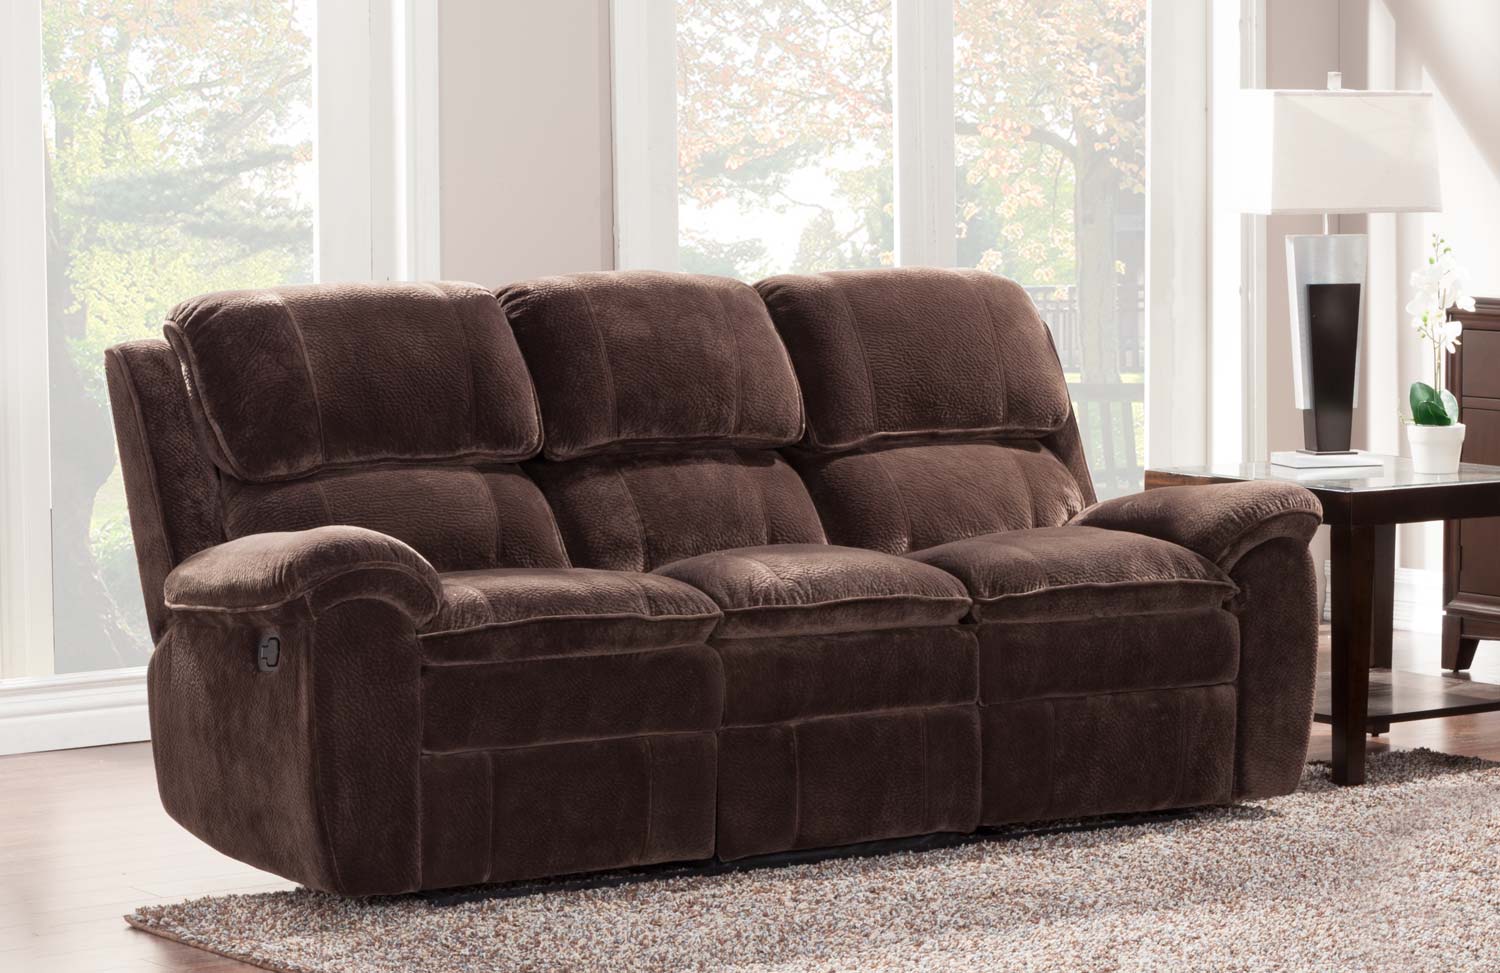 Homelegance Reilly Sofa Double Recliner - Chocolate - Textured Plush Microfiber